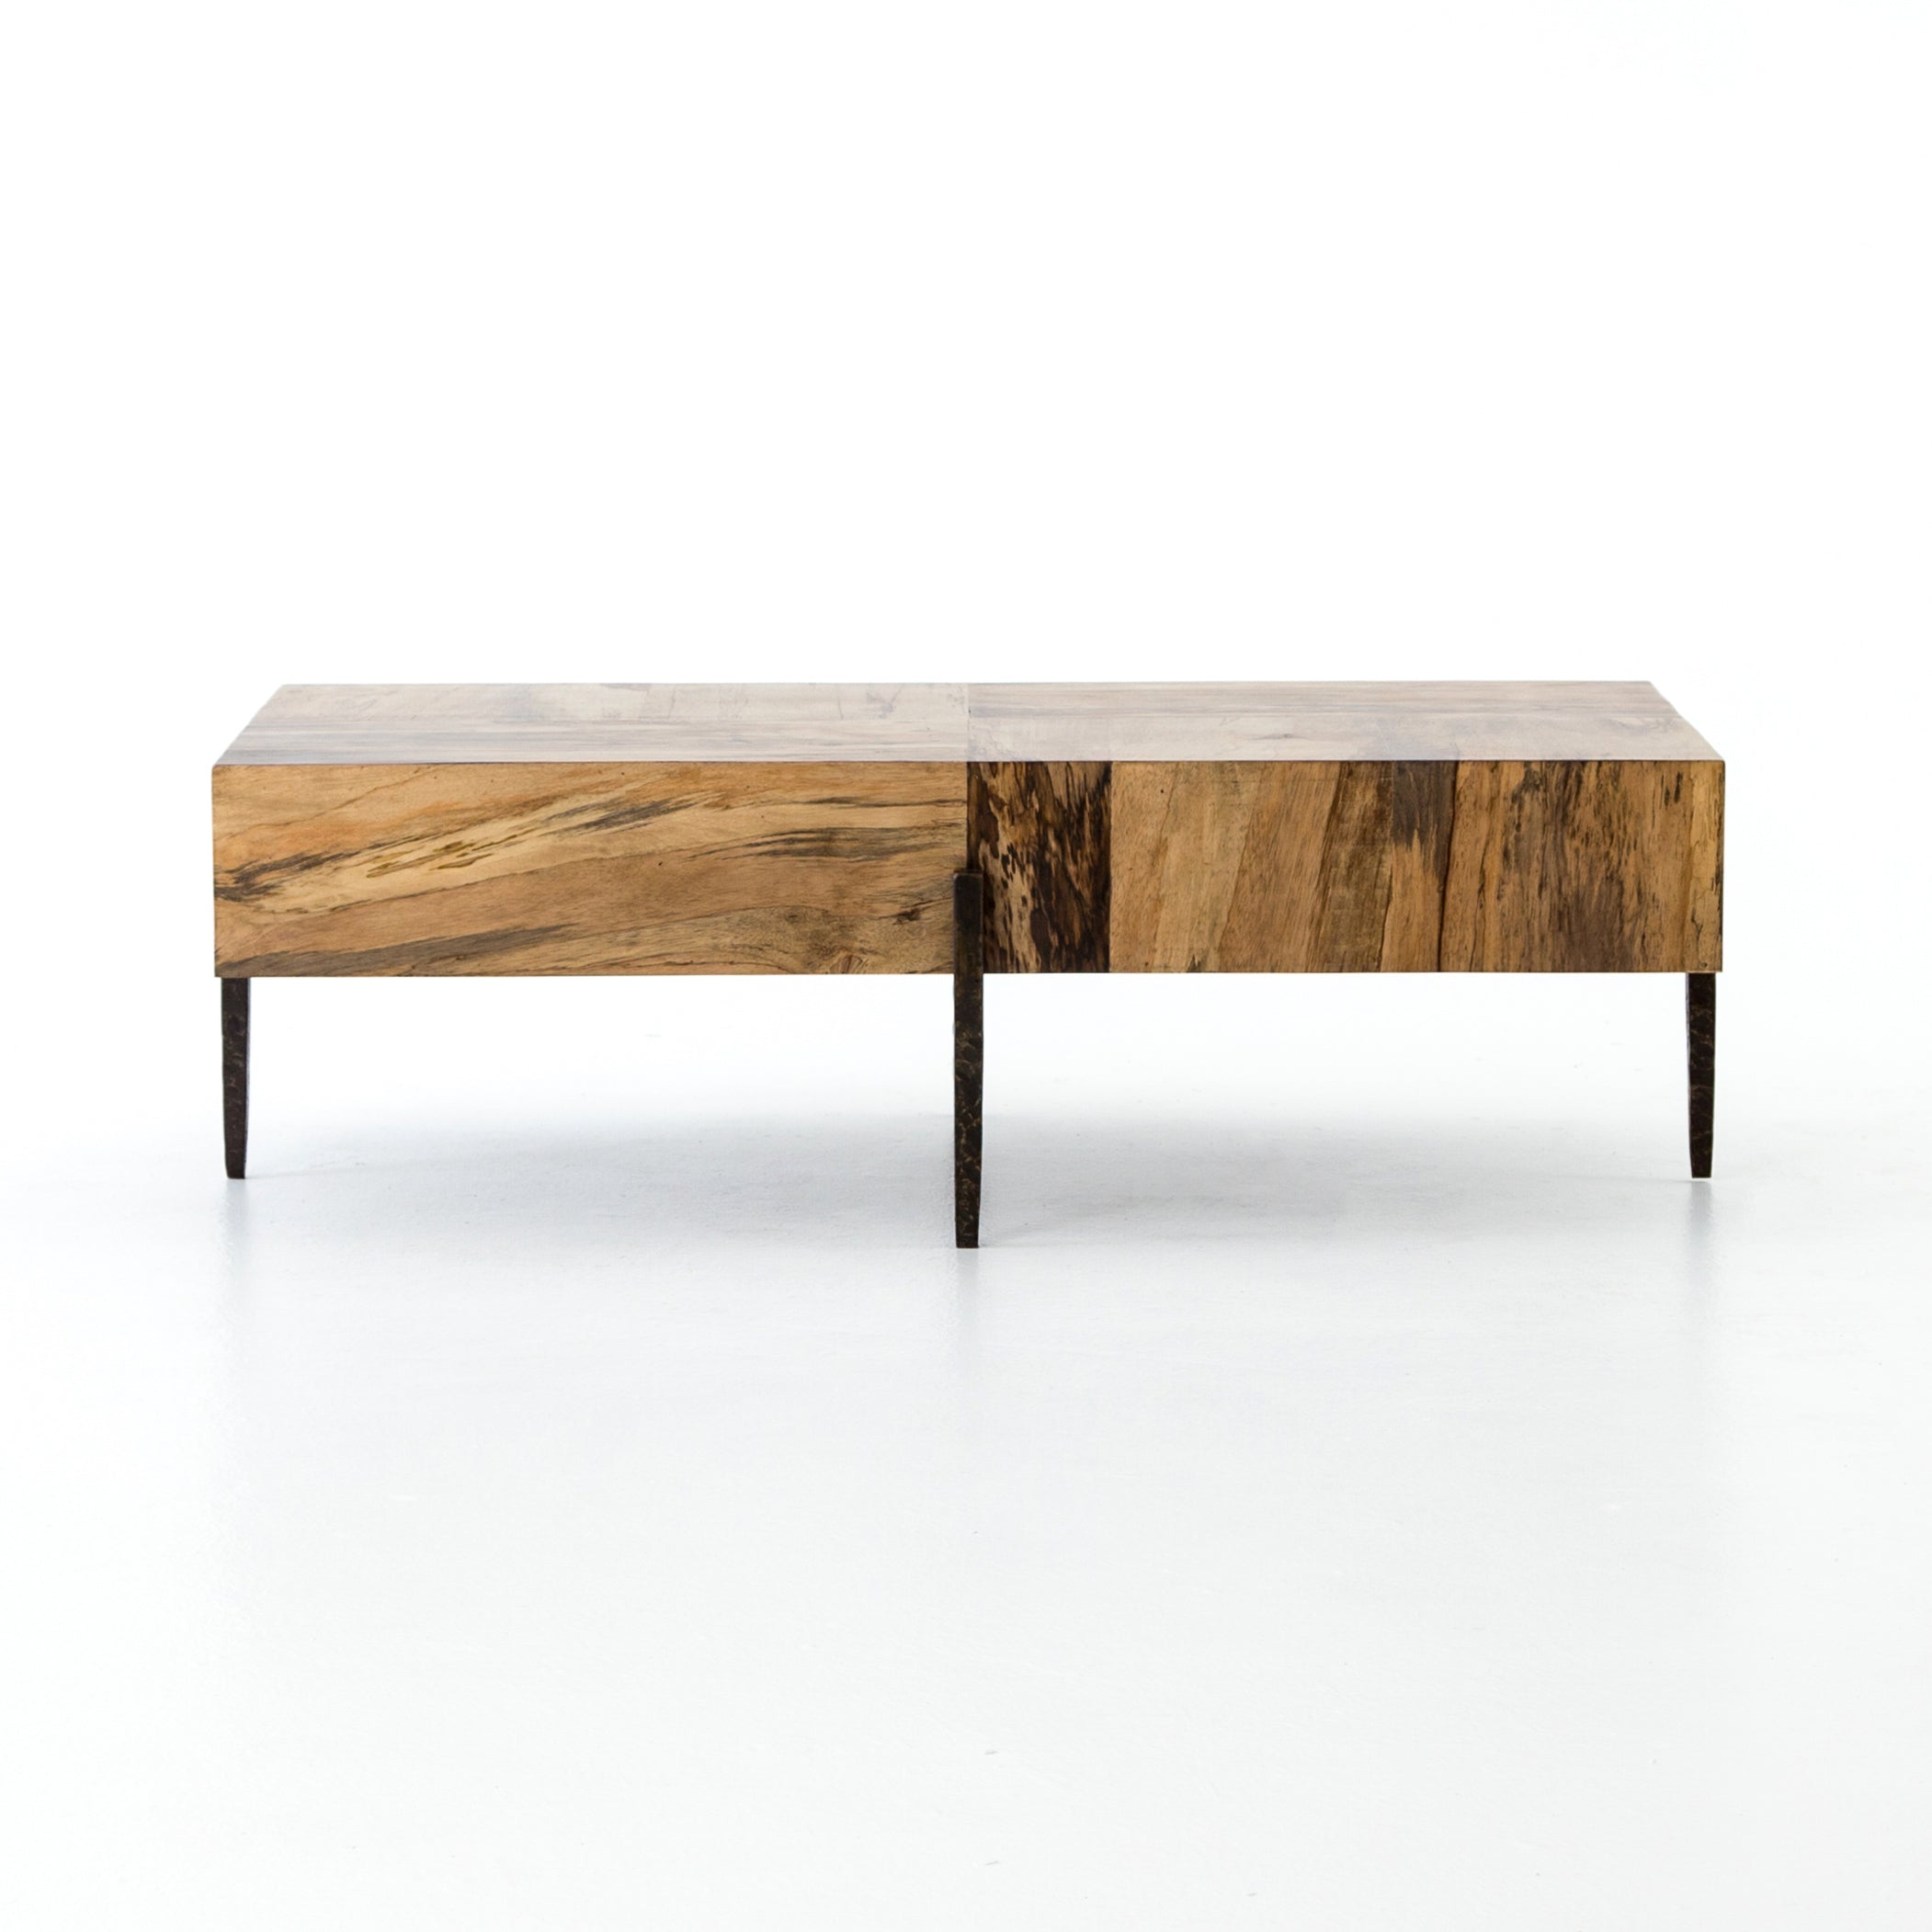 BTEOBFY Natural Wood Edge Contemporary Coffee Cocktail Table, Warm&Air Live Edge Coffee Table,Living Room Coffee Table with Clea